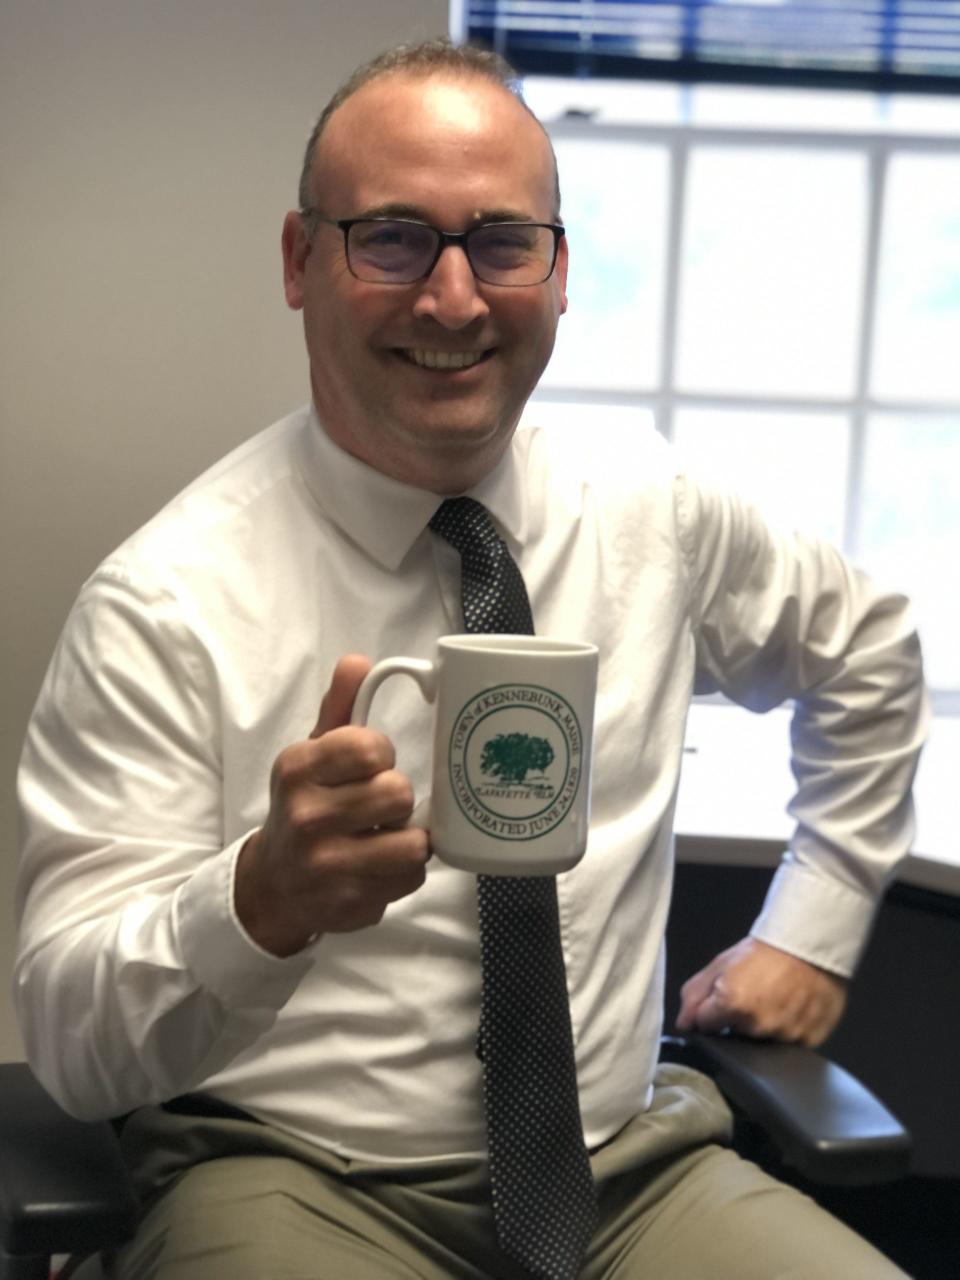 Stephen Houdlette is the new director of economic vitality for the town of Kennebunk. He is seen here, lifting a mug sporting the town's trademark Lafayette Elm, in his office at the town hall on June 29, 2023.